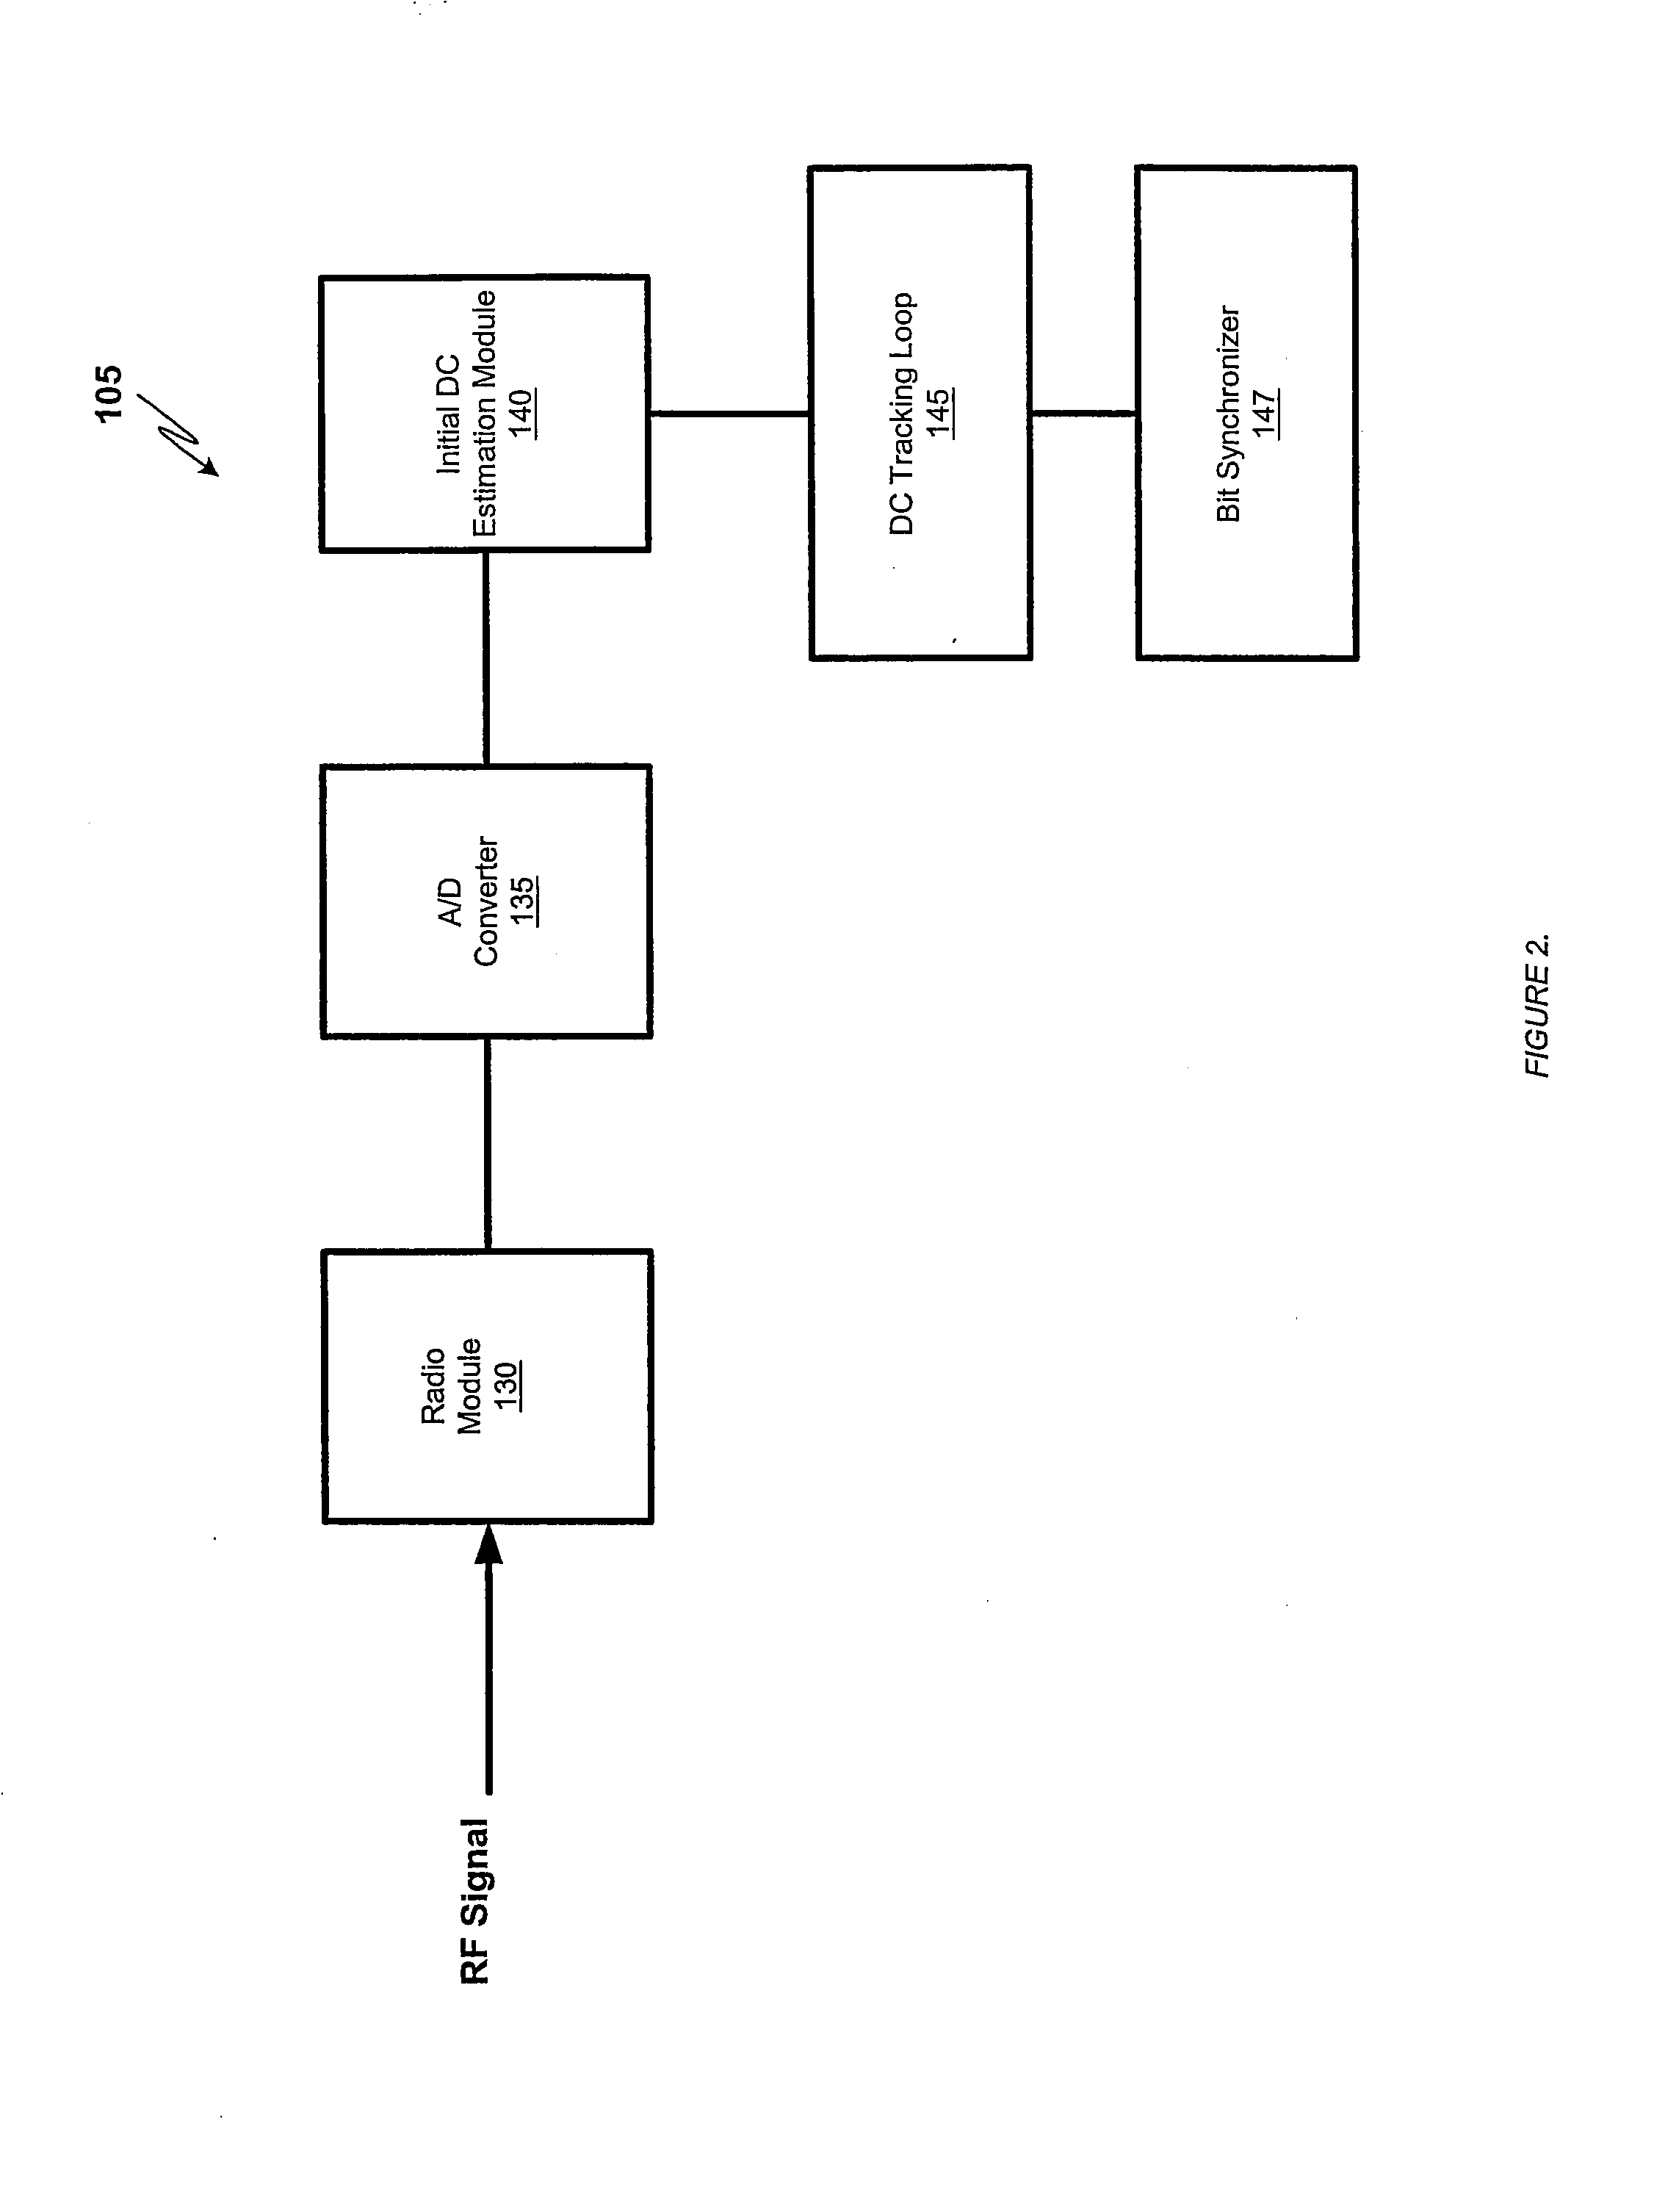 System and method for DC offset compensation and bit synchronization